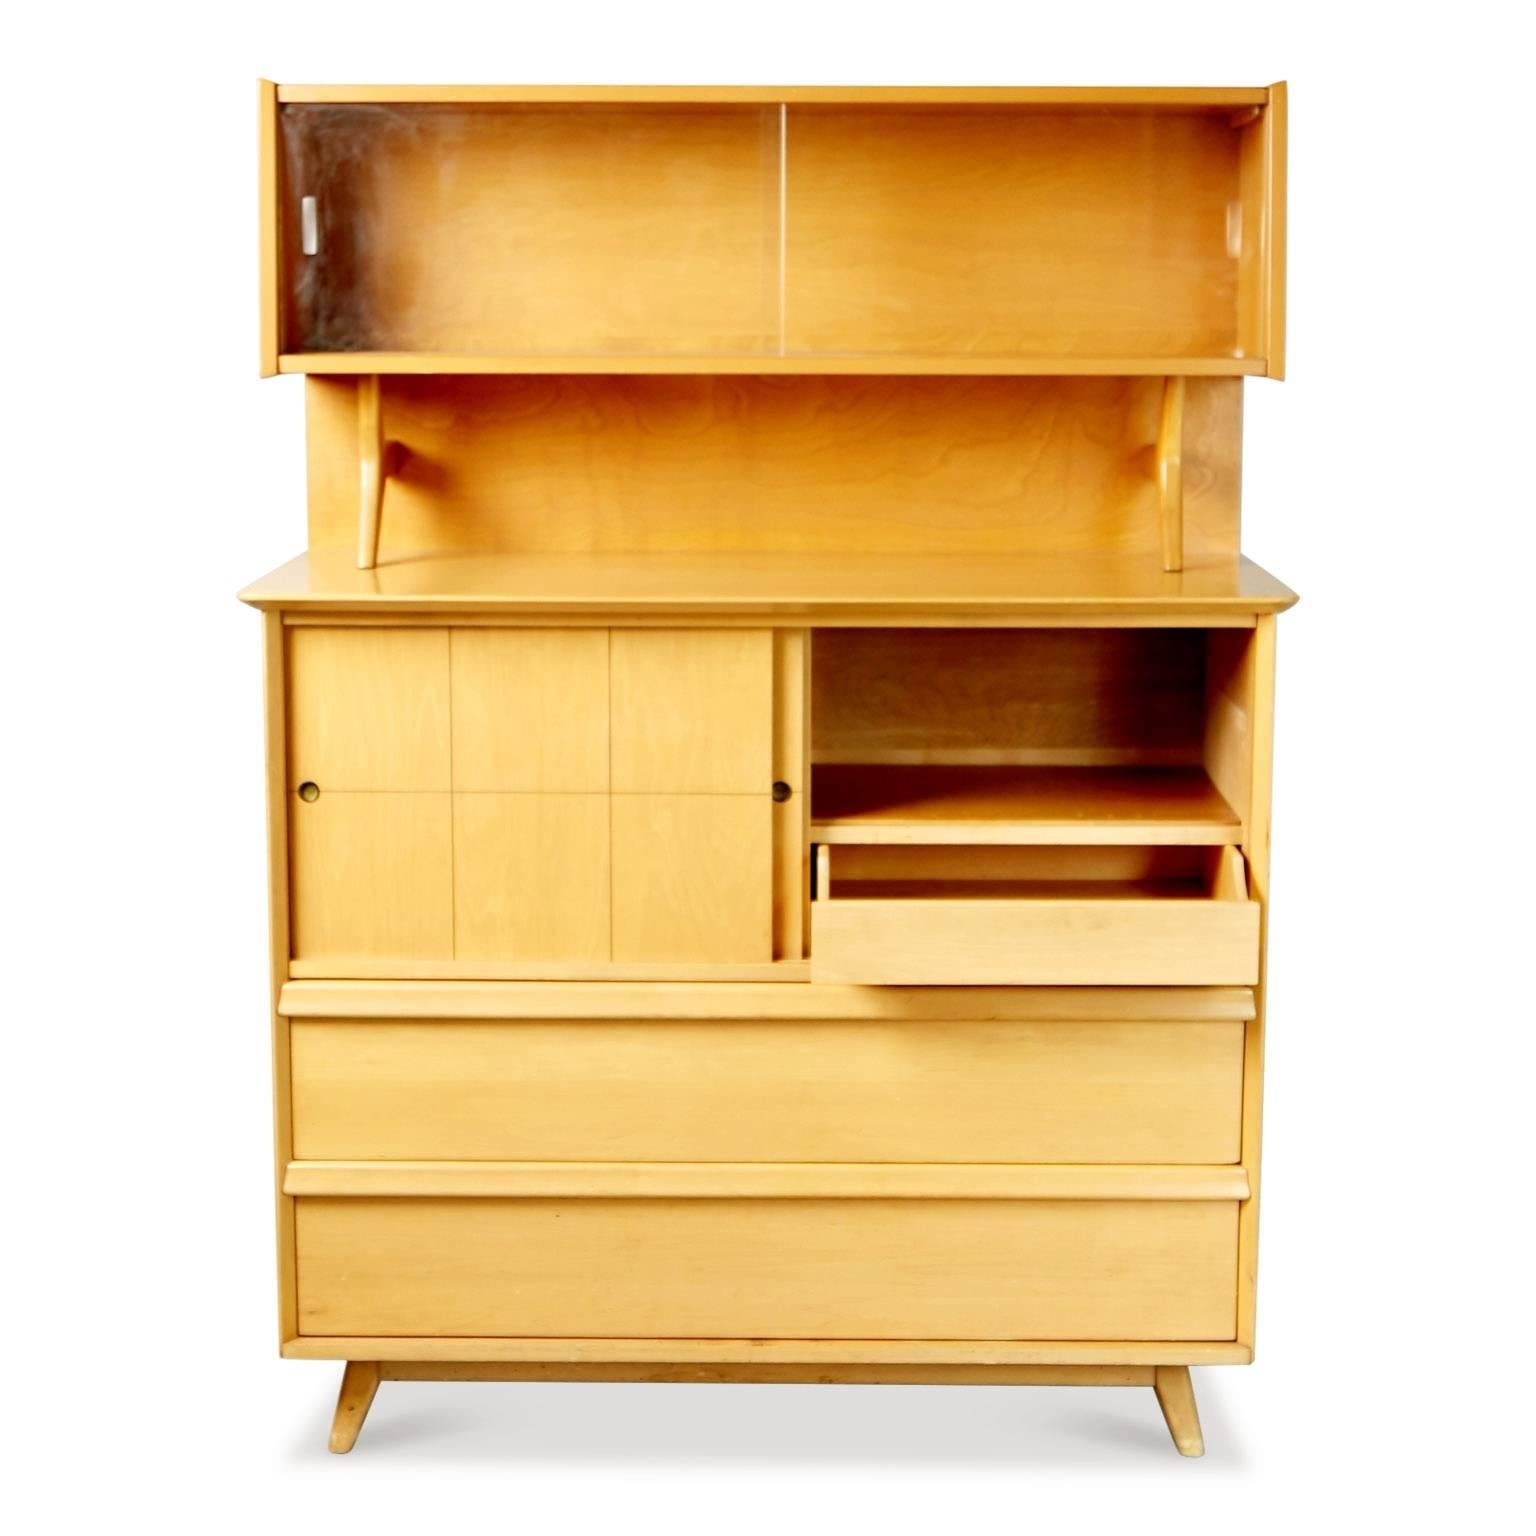 A very cute sculptural Mid-Century Modern cabinet with display hutch by Baumritter, circa 1955. 

This display cabinet is fabricated from golden toned maple with multiple compartments and shelving options, offering a wealth of storage options. The